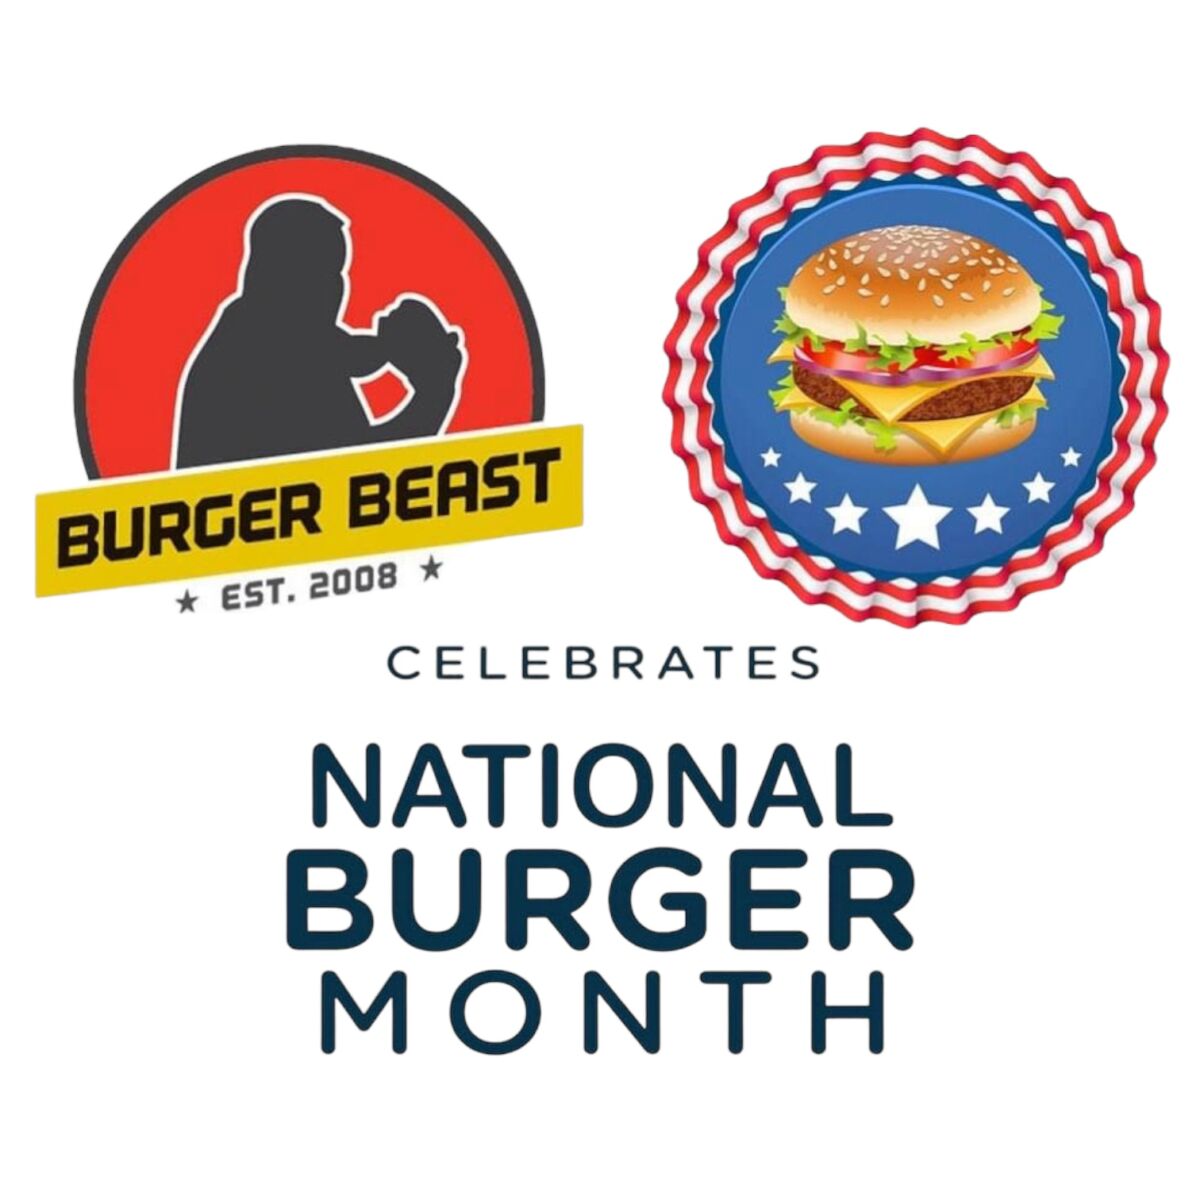 National Burger Month by Burger Beast is Every May